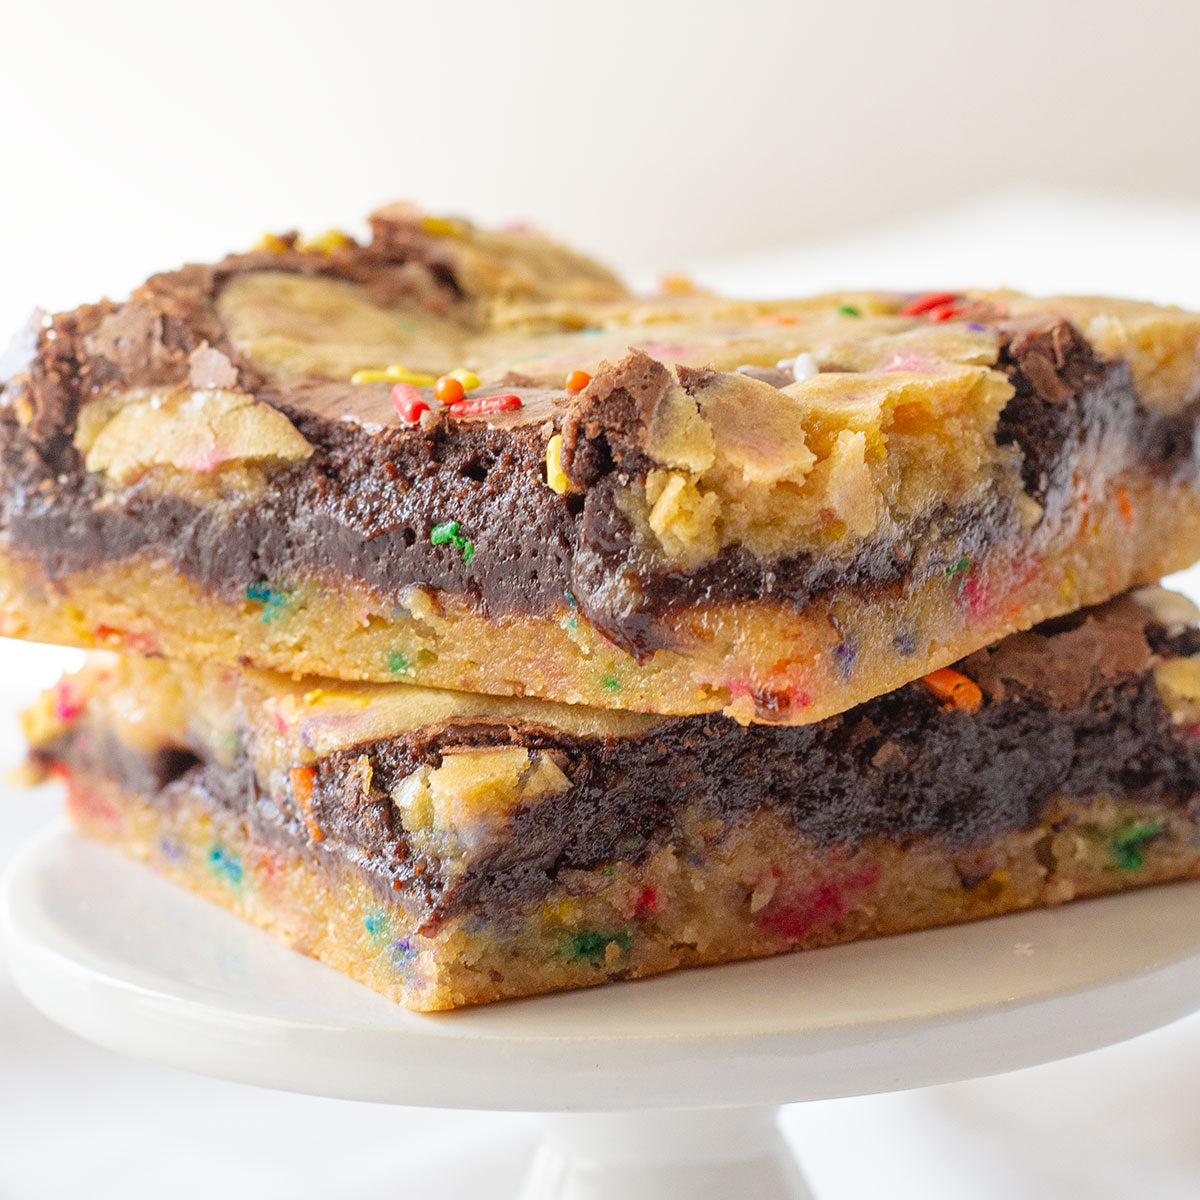 A mouthwatering image of a Birthday Cake Brownie, featuring layers of fudgy chocolate brownie and cake-flavored cookie dough, topped with dollops of cookie dough.